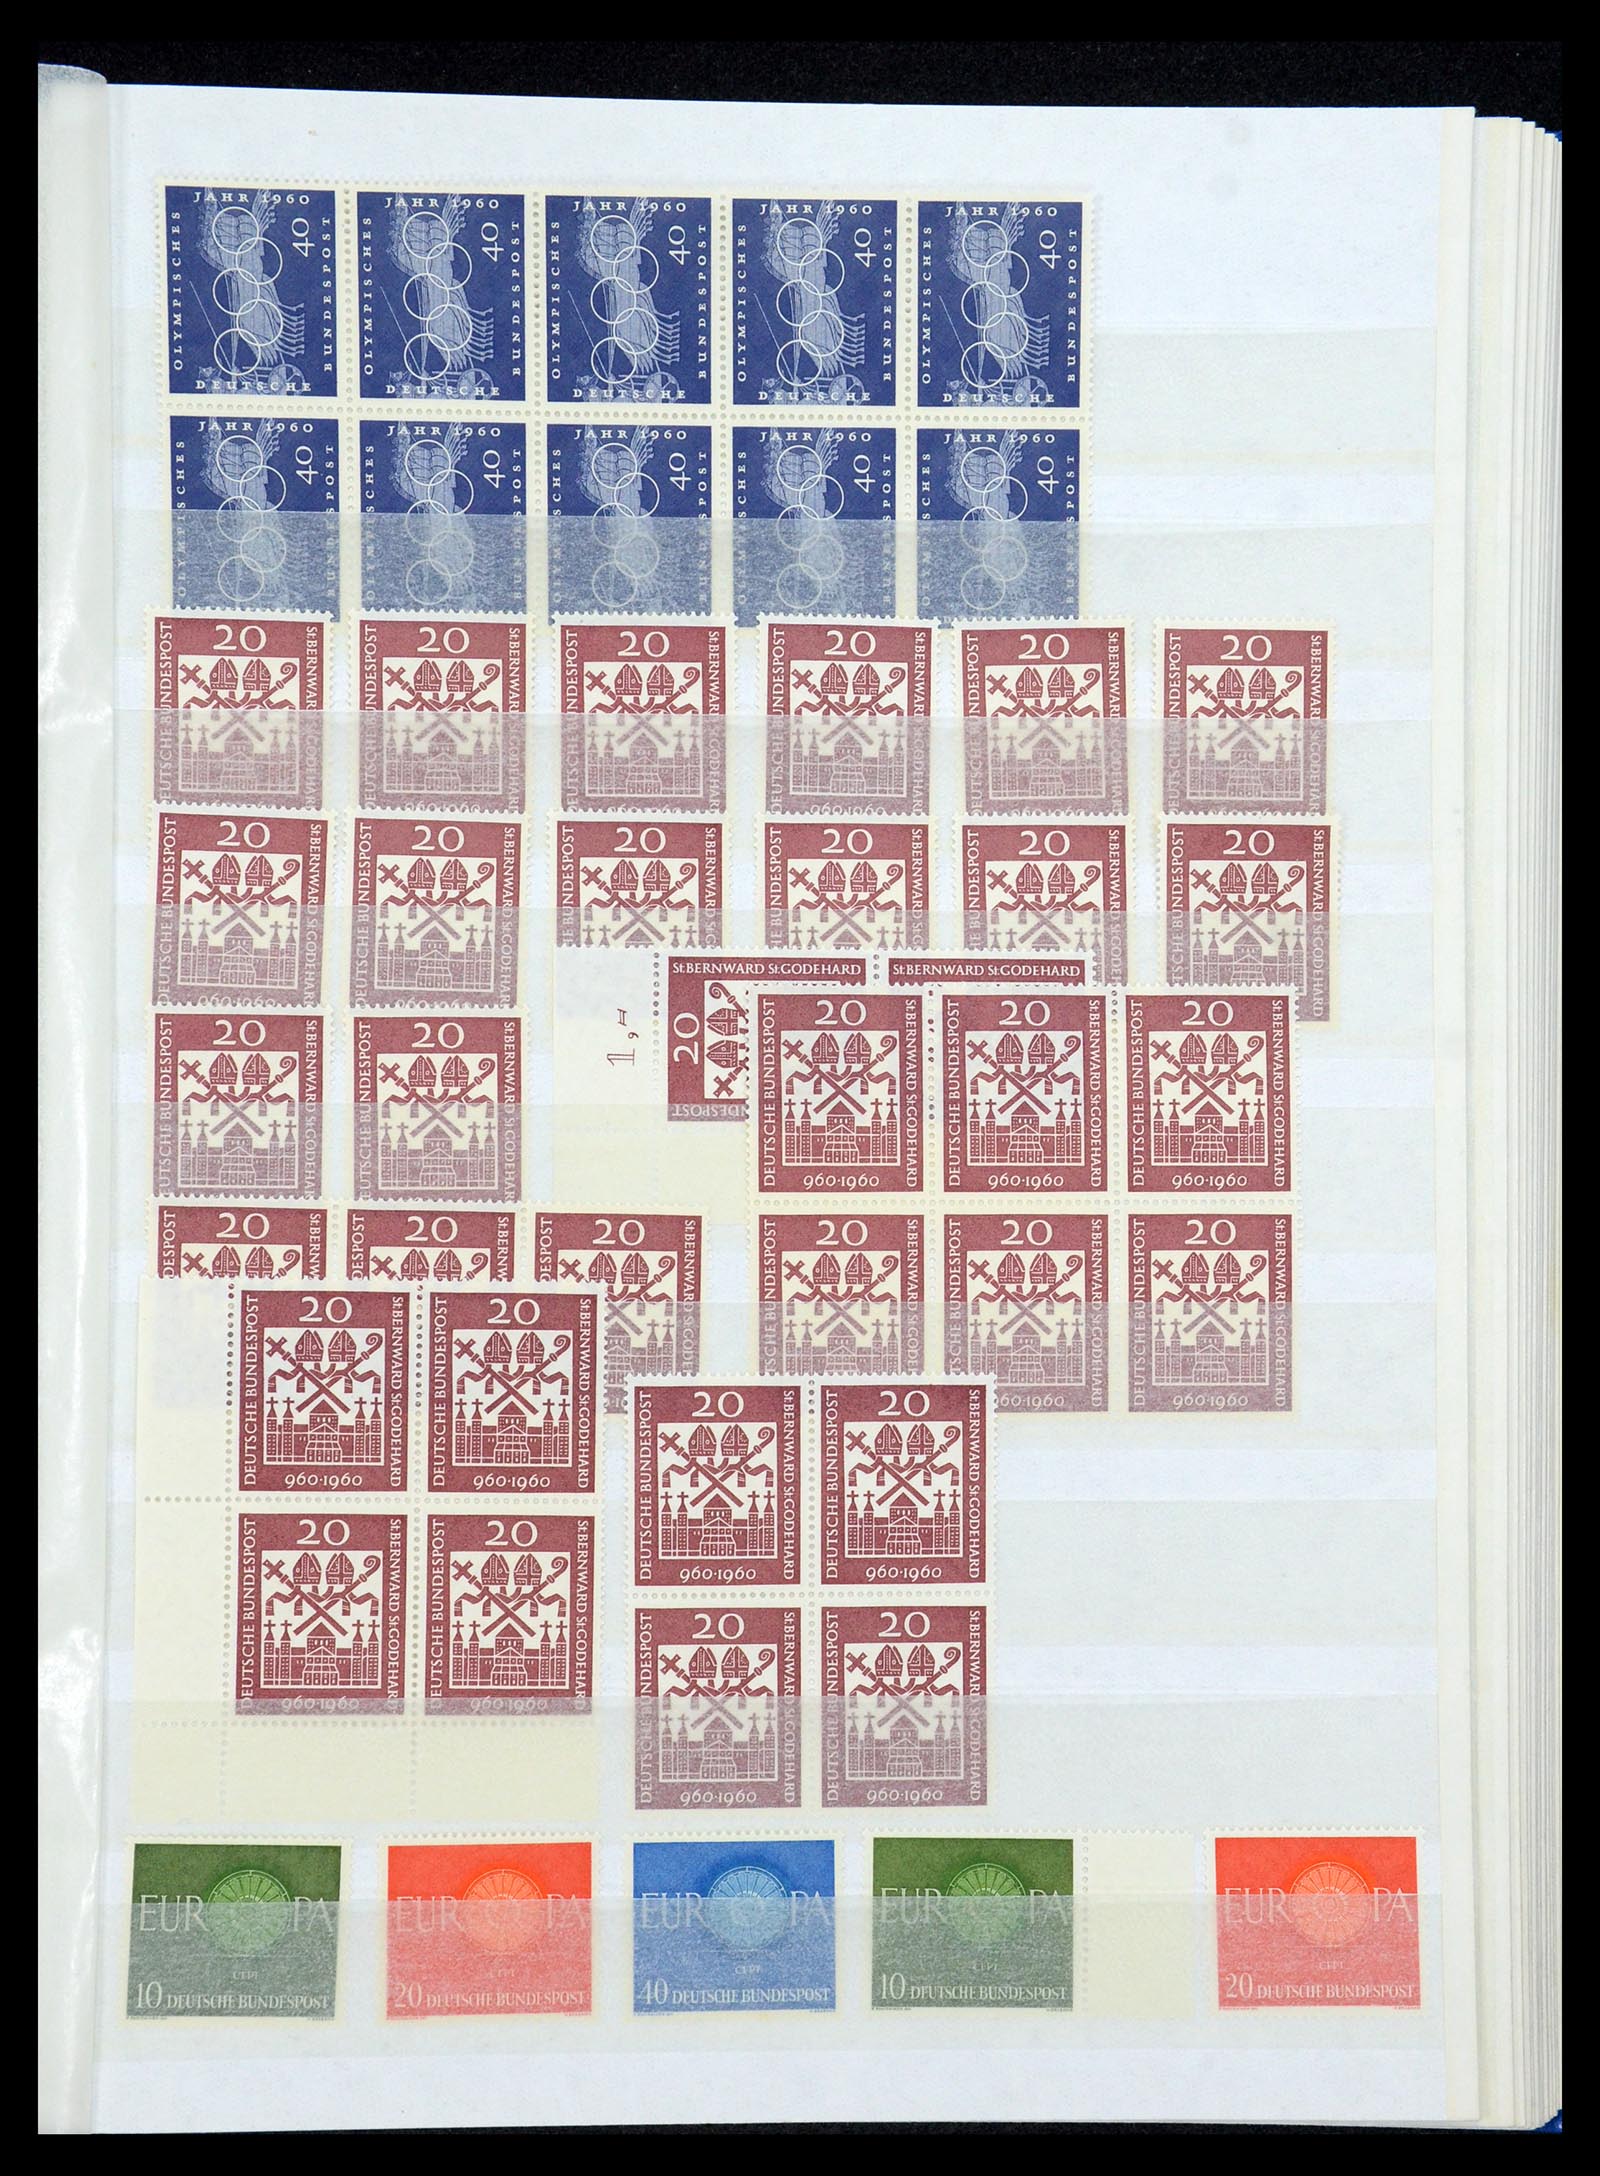 35909 031 - Stamp Collection 35909 Bundespost 1949-2000.